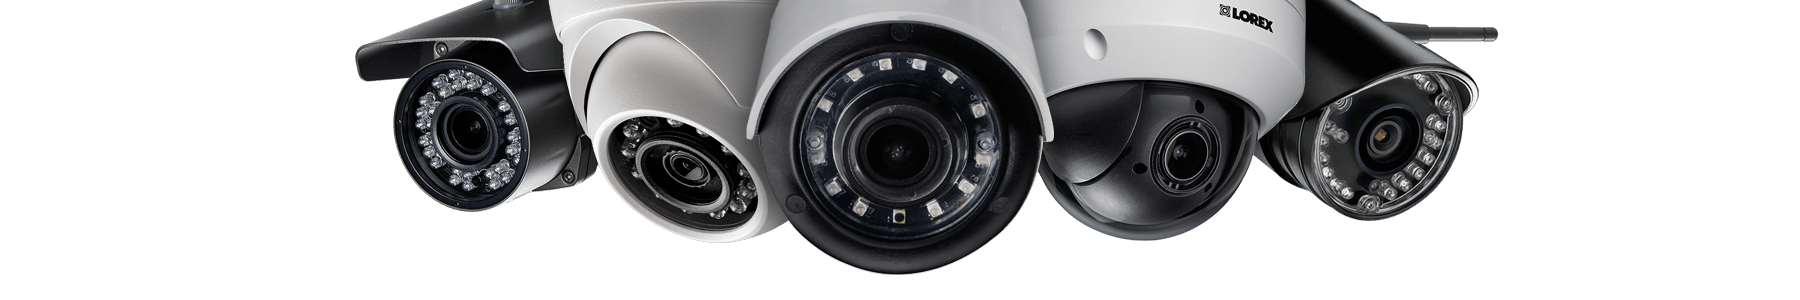 NVR supports all IP cameras